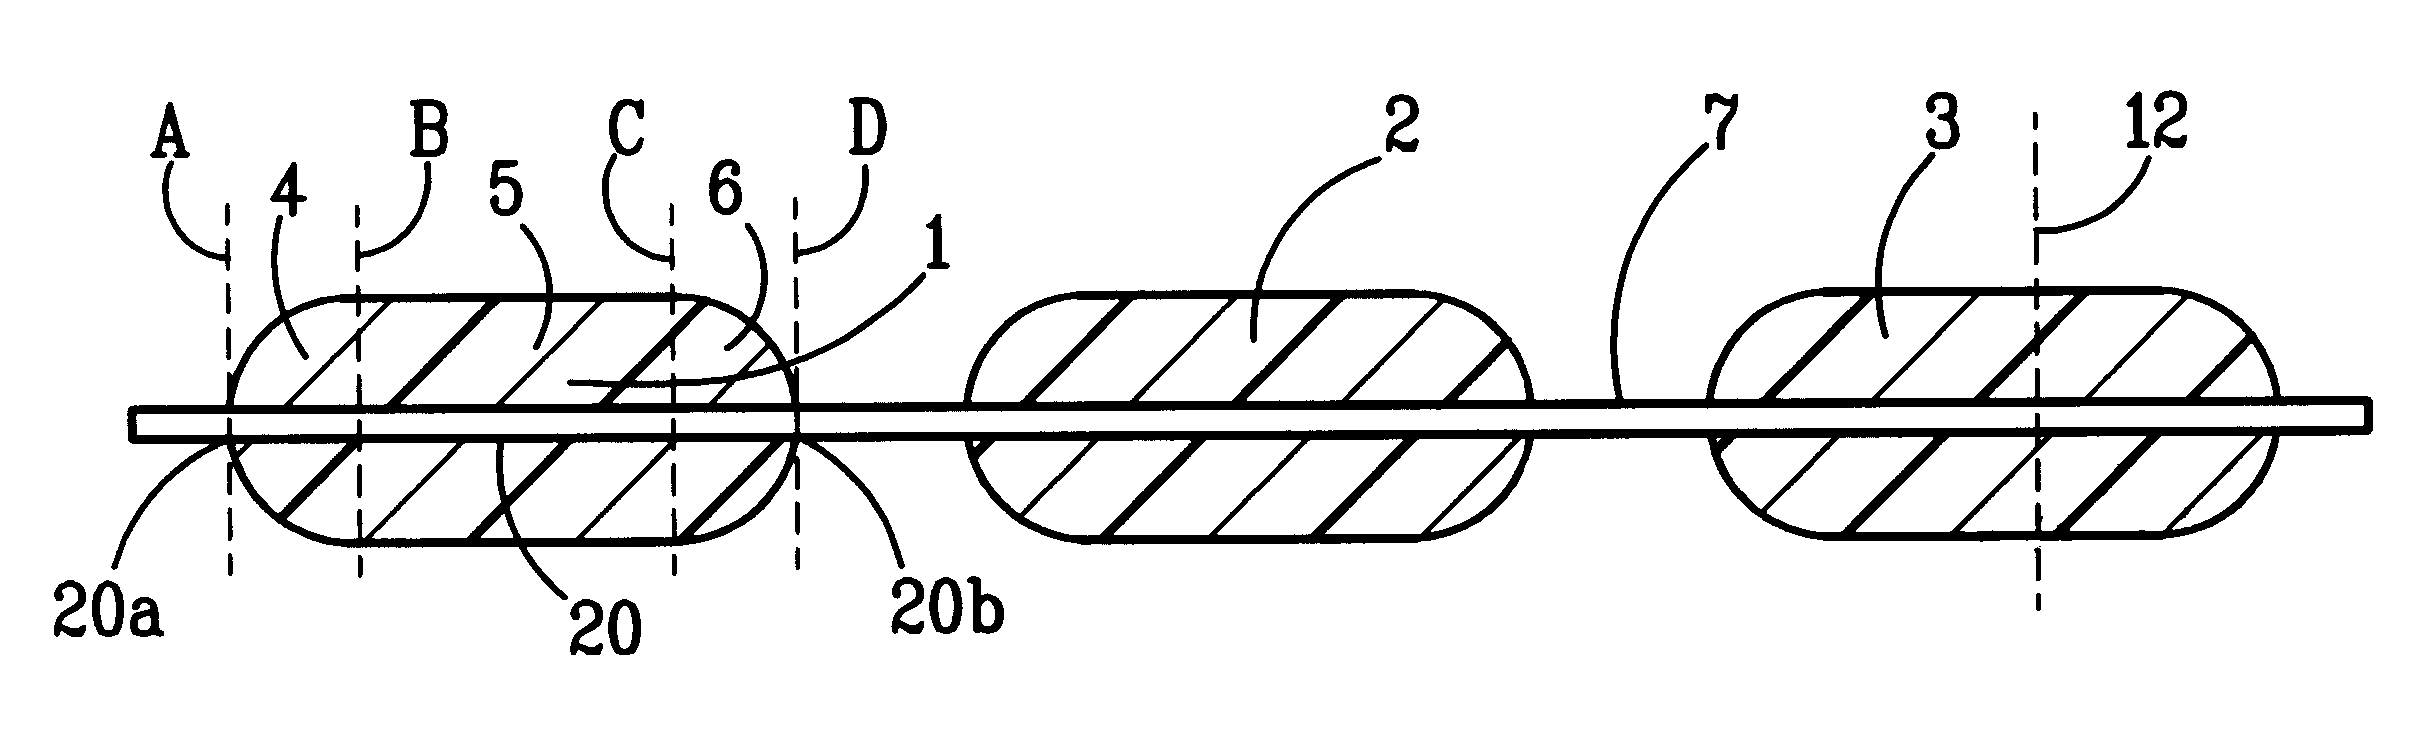 Implantable medicine releasing corpuscles and method of making, implanting and removing the same